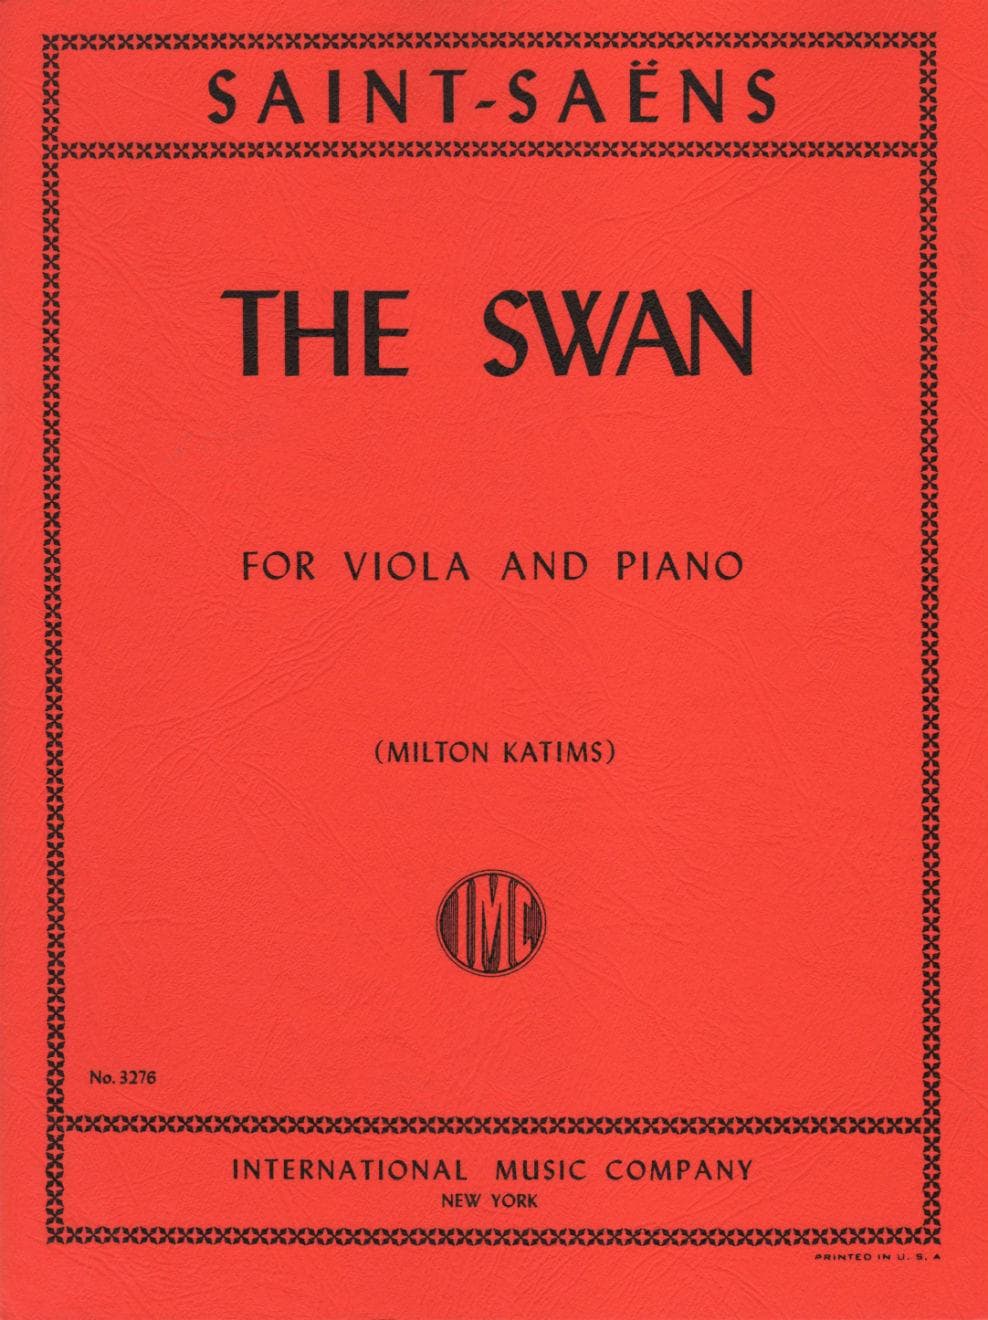 Saint-Saens, Camille - The Swan(from Carnival of the Animals) For Viola and Piano Edited by Milton Katims Published by International Music Company